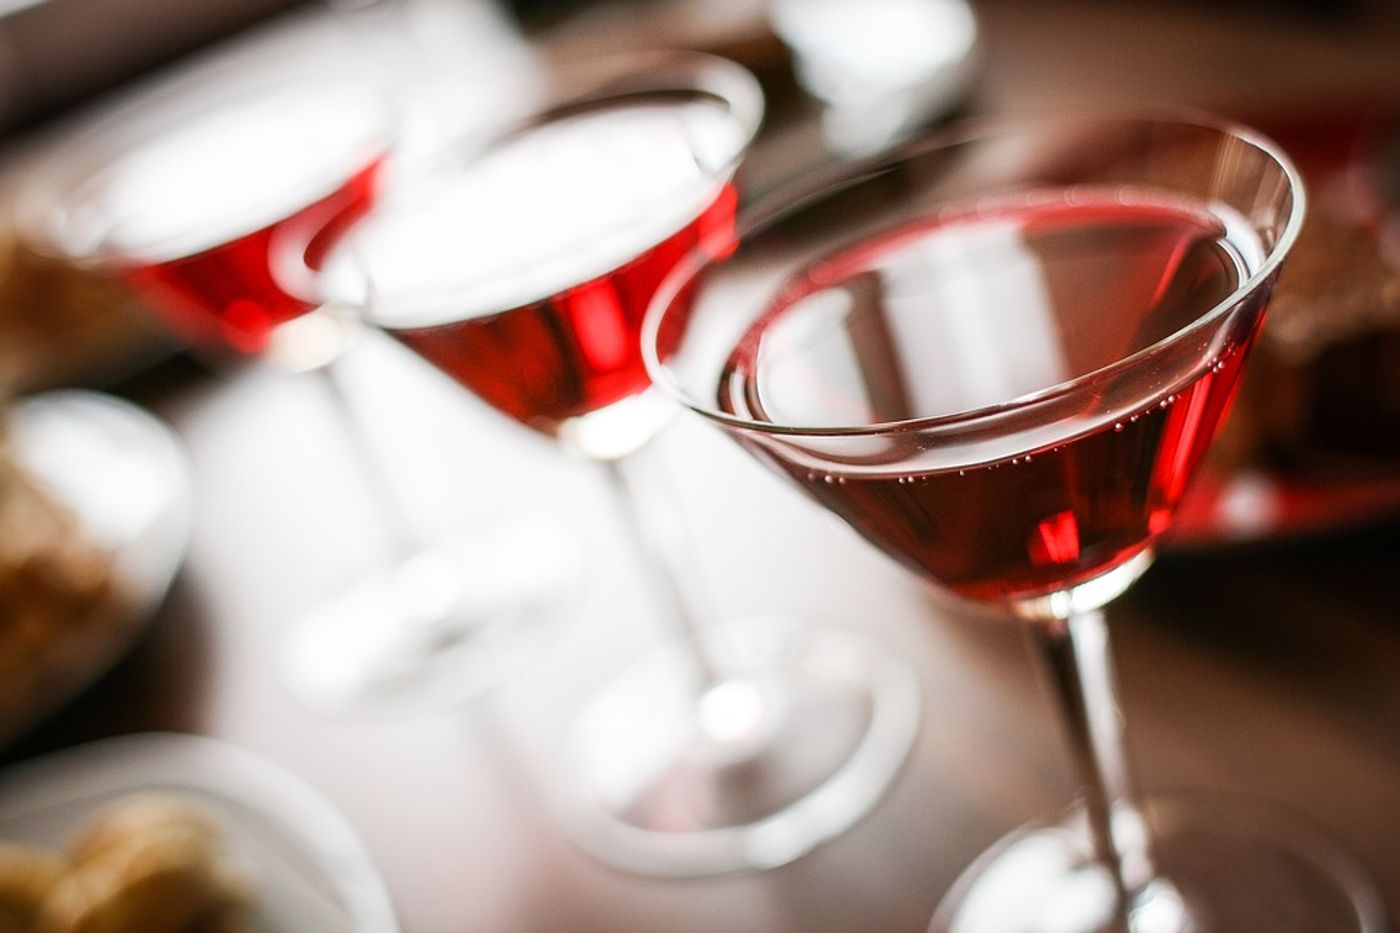 Females, beware! Breast cancer risks higher with alcohol consumption